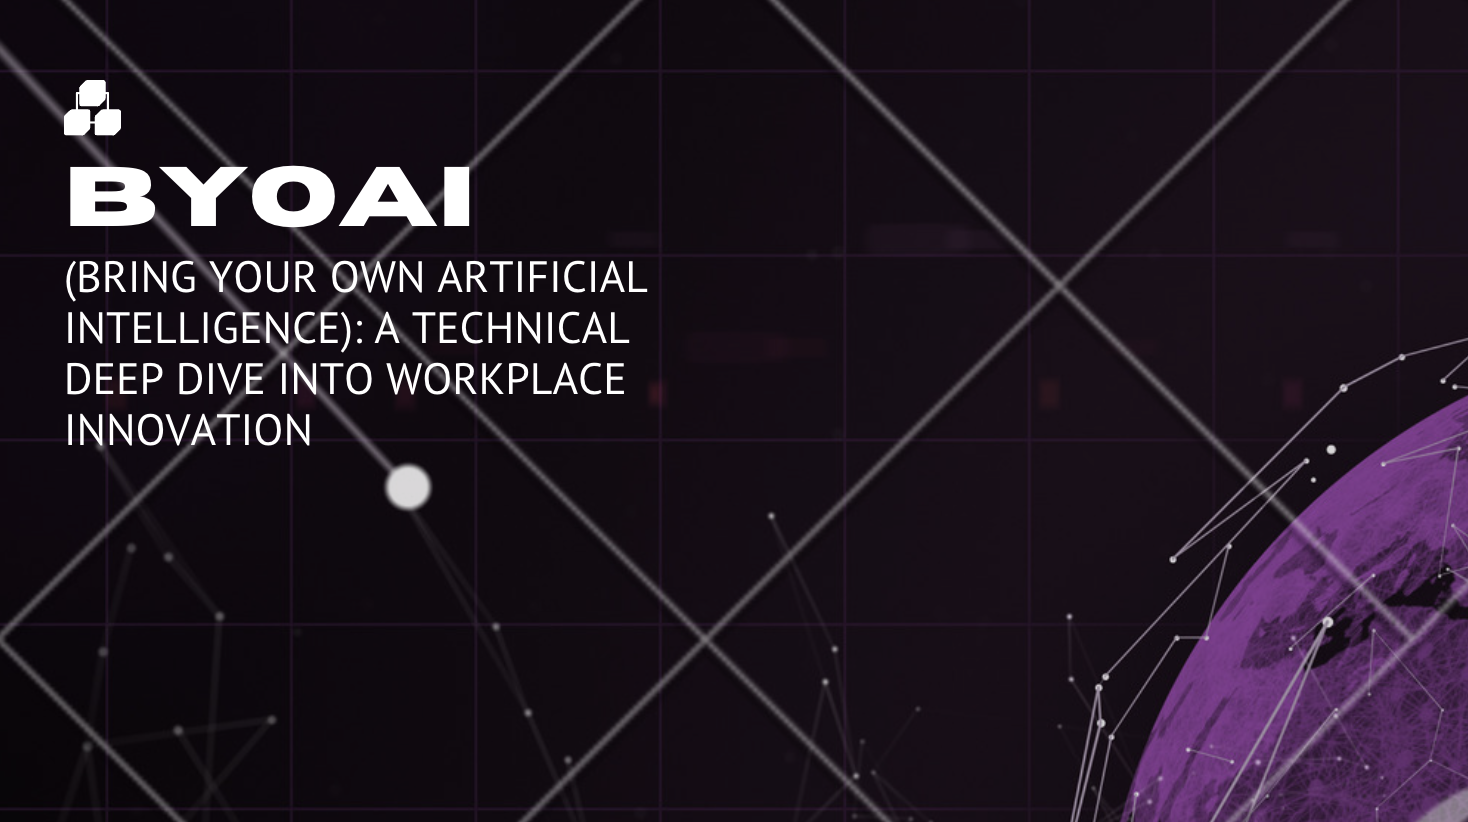 BYOAI (Bring Your Own Artificial Intelligence): A Technical Deep Dive into Workplace Innovation